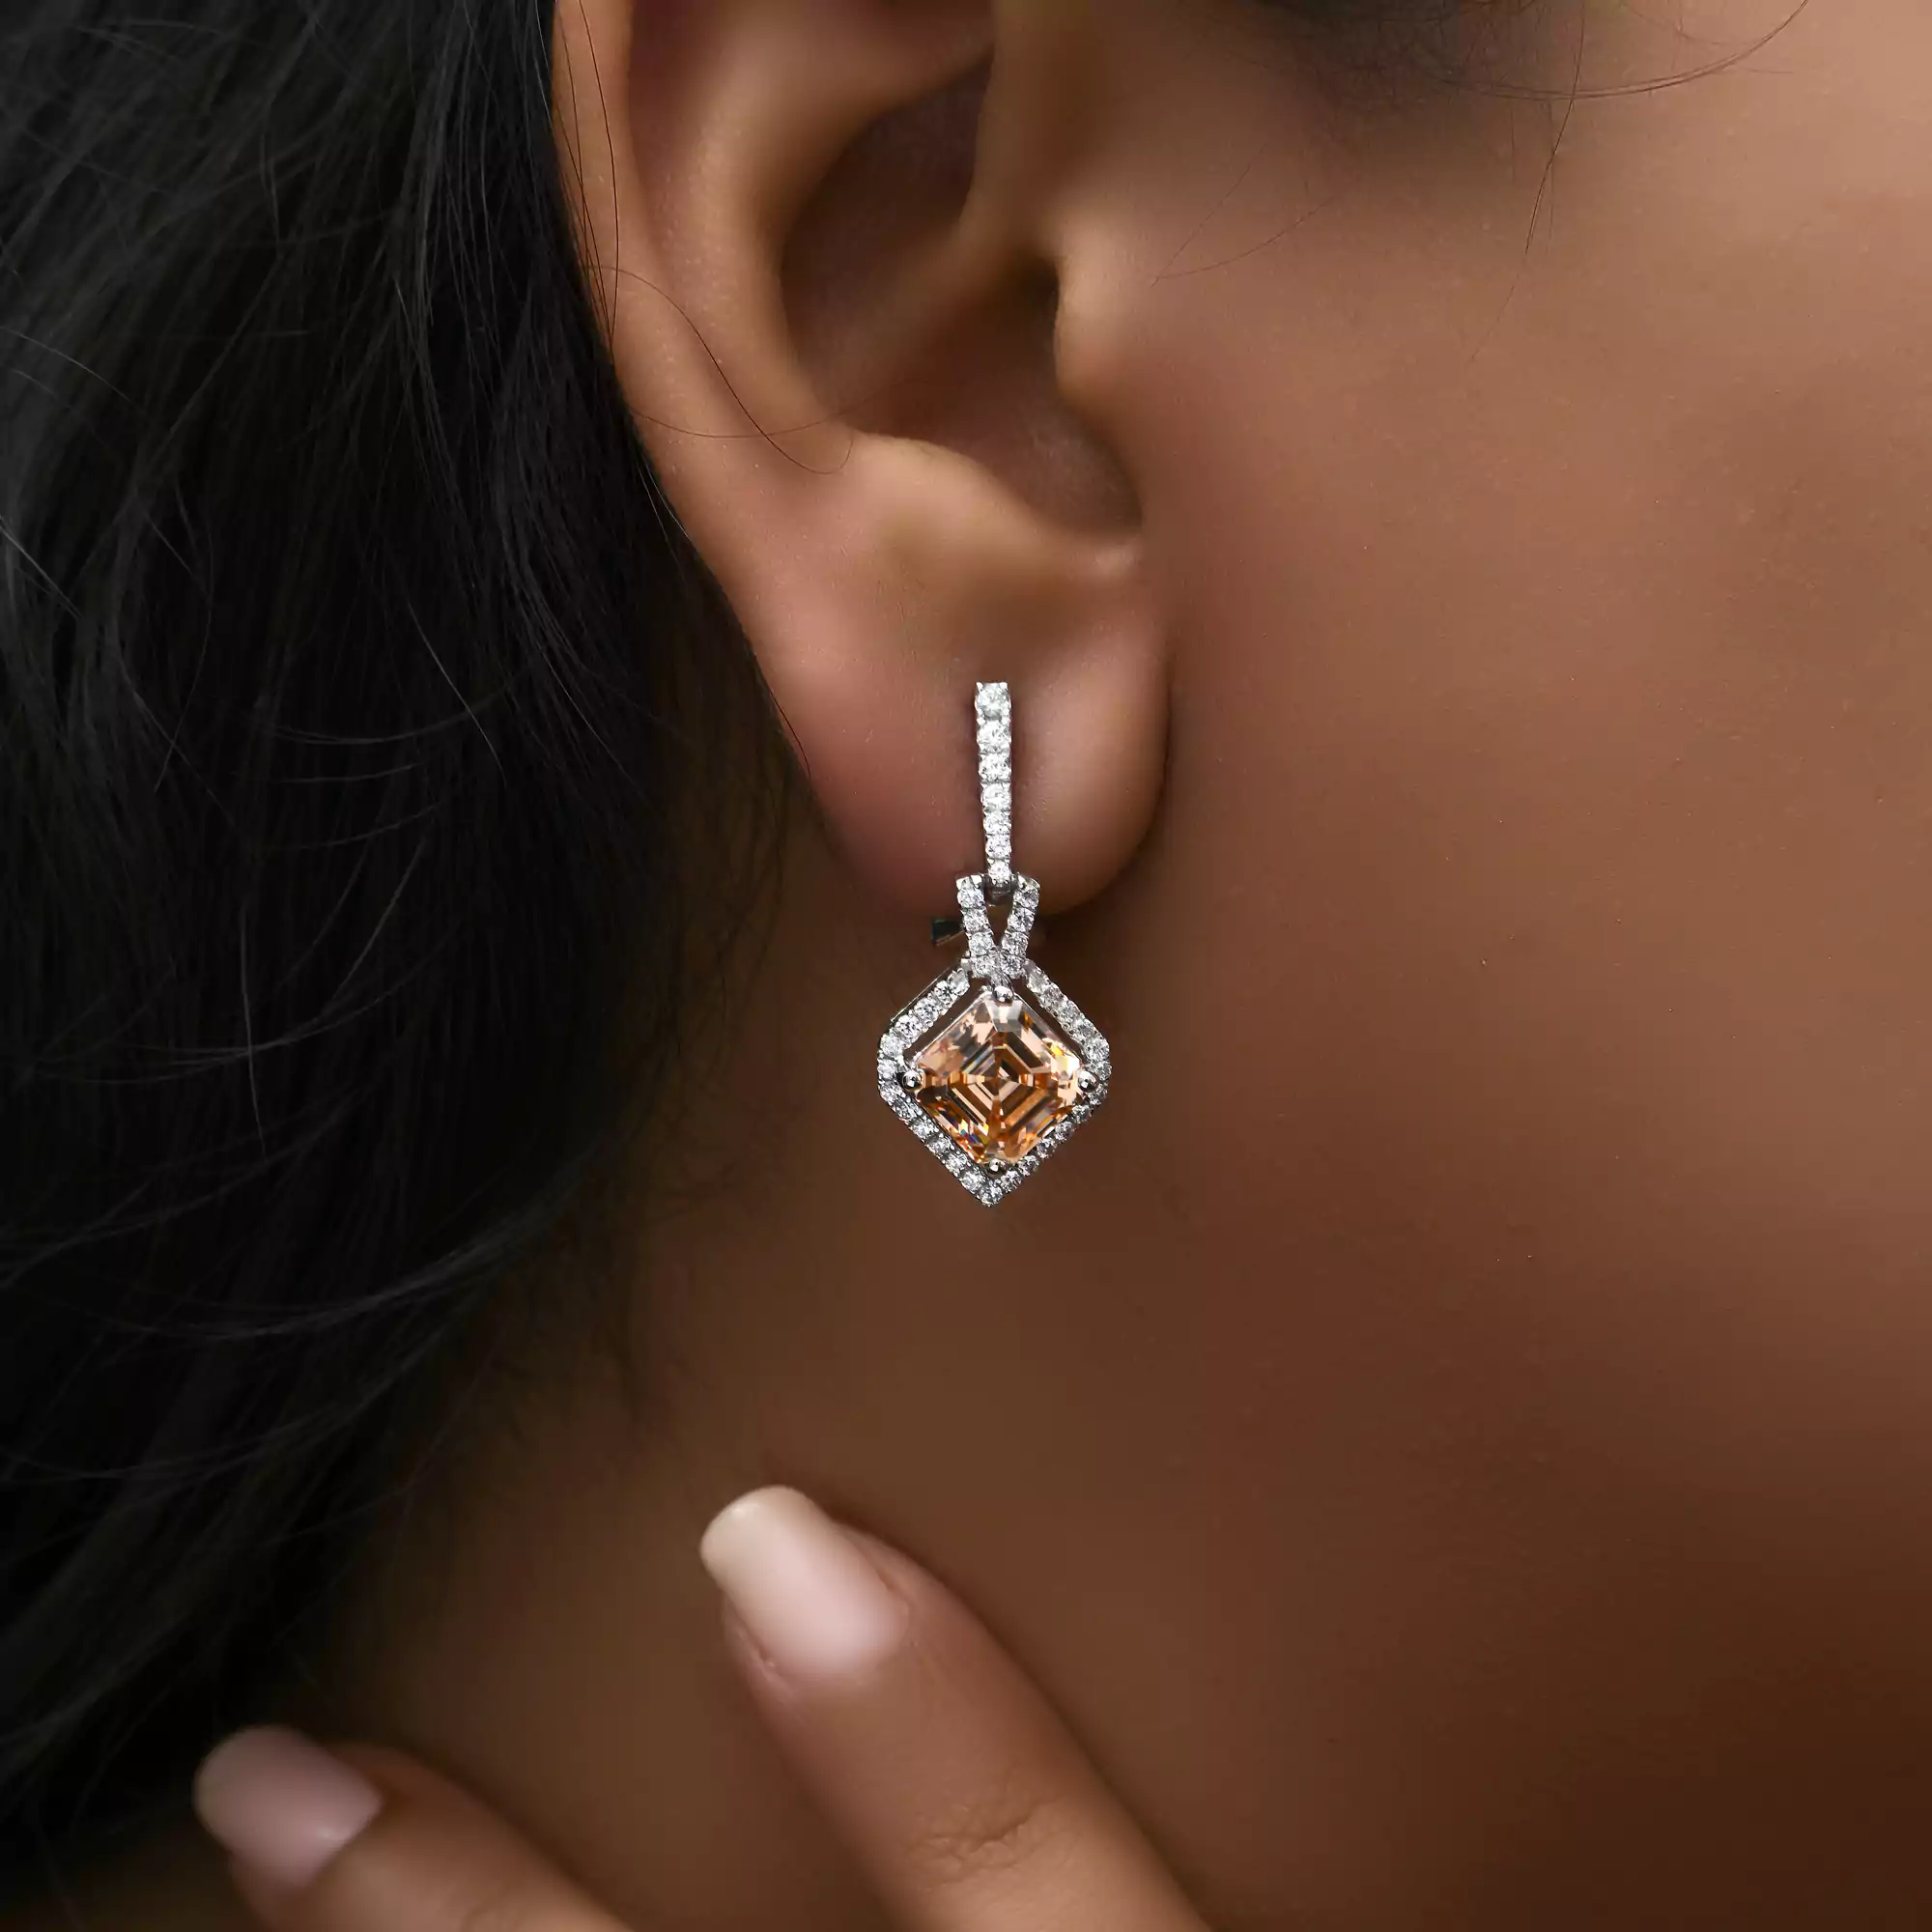 MAGNIFICENT LITTLE EARRINGS